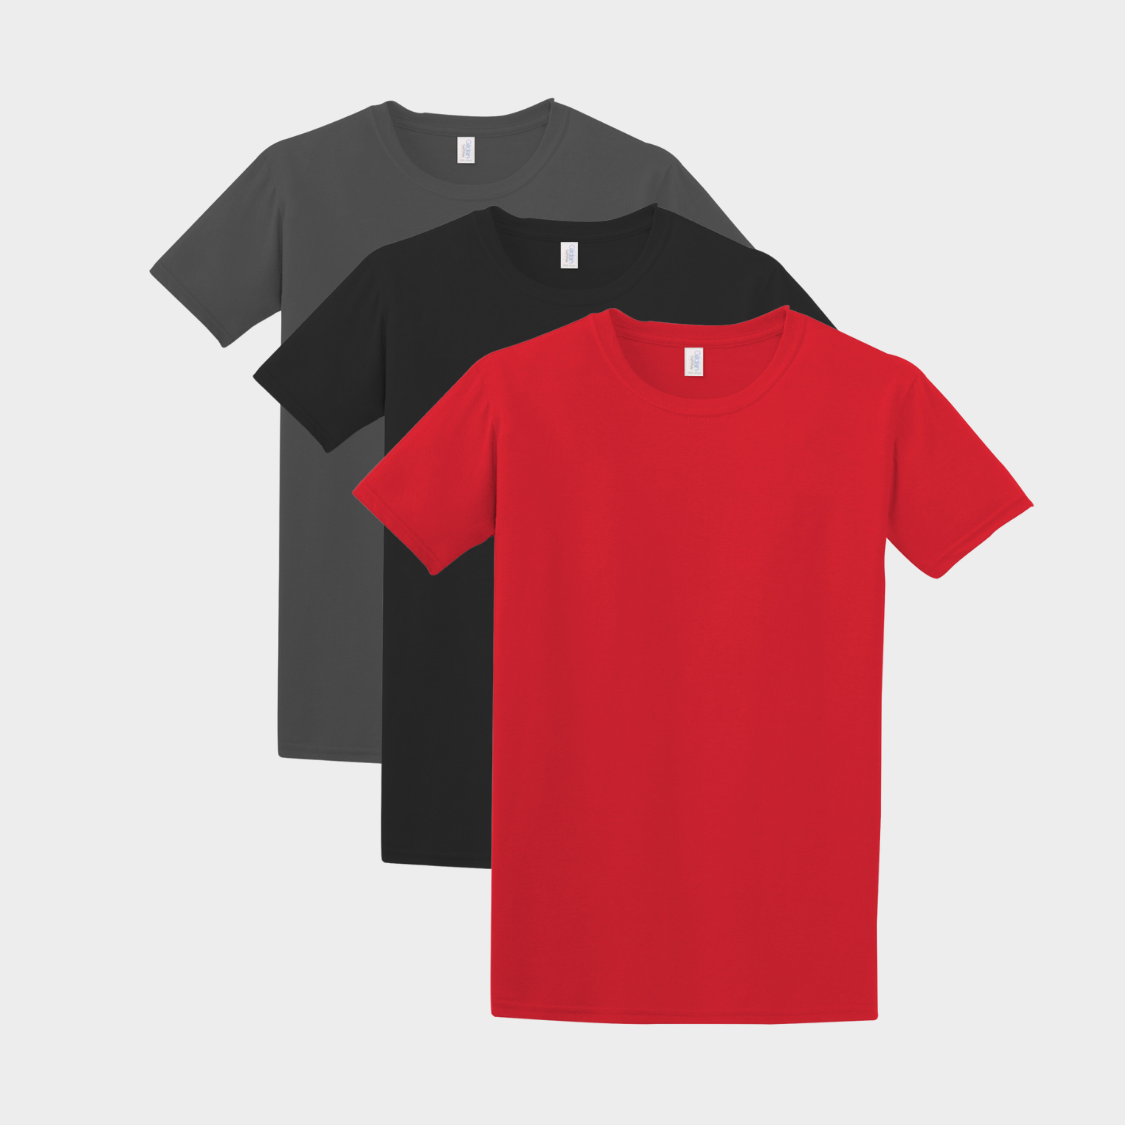 Pack of 3 solid t-shirts (Heather, Black, Red) Size L